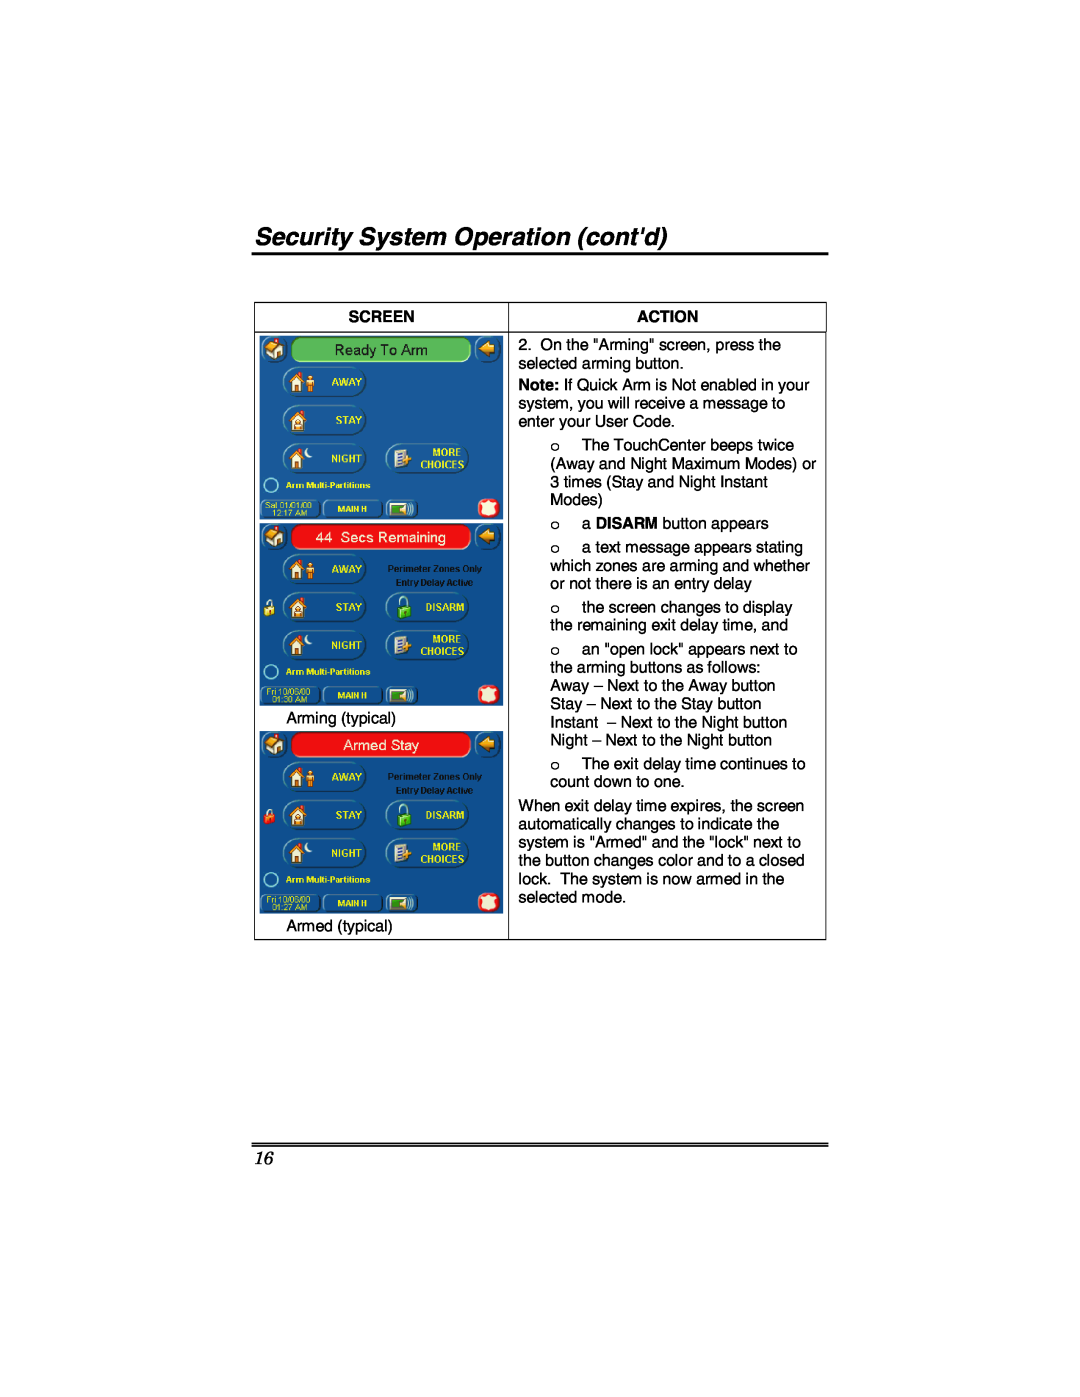 Honeywell 6271 manual Security System Operation contd, Screen, Action 